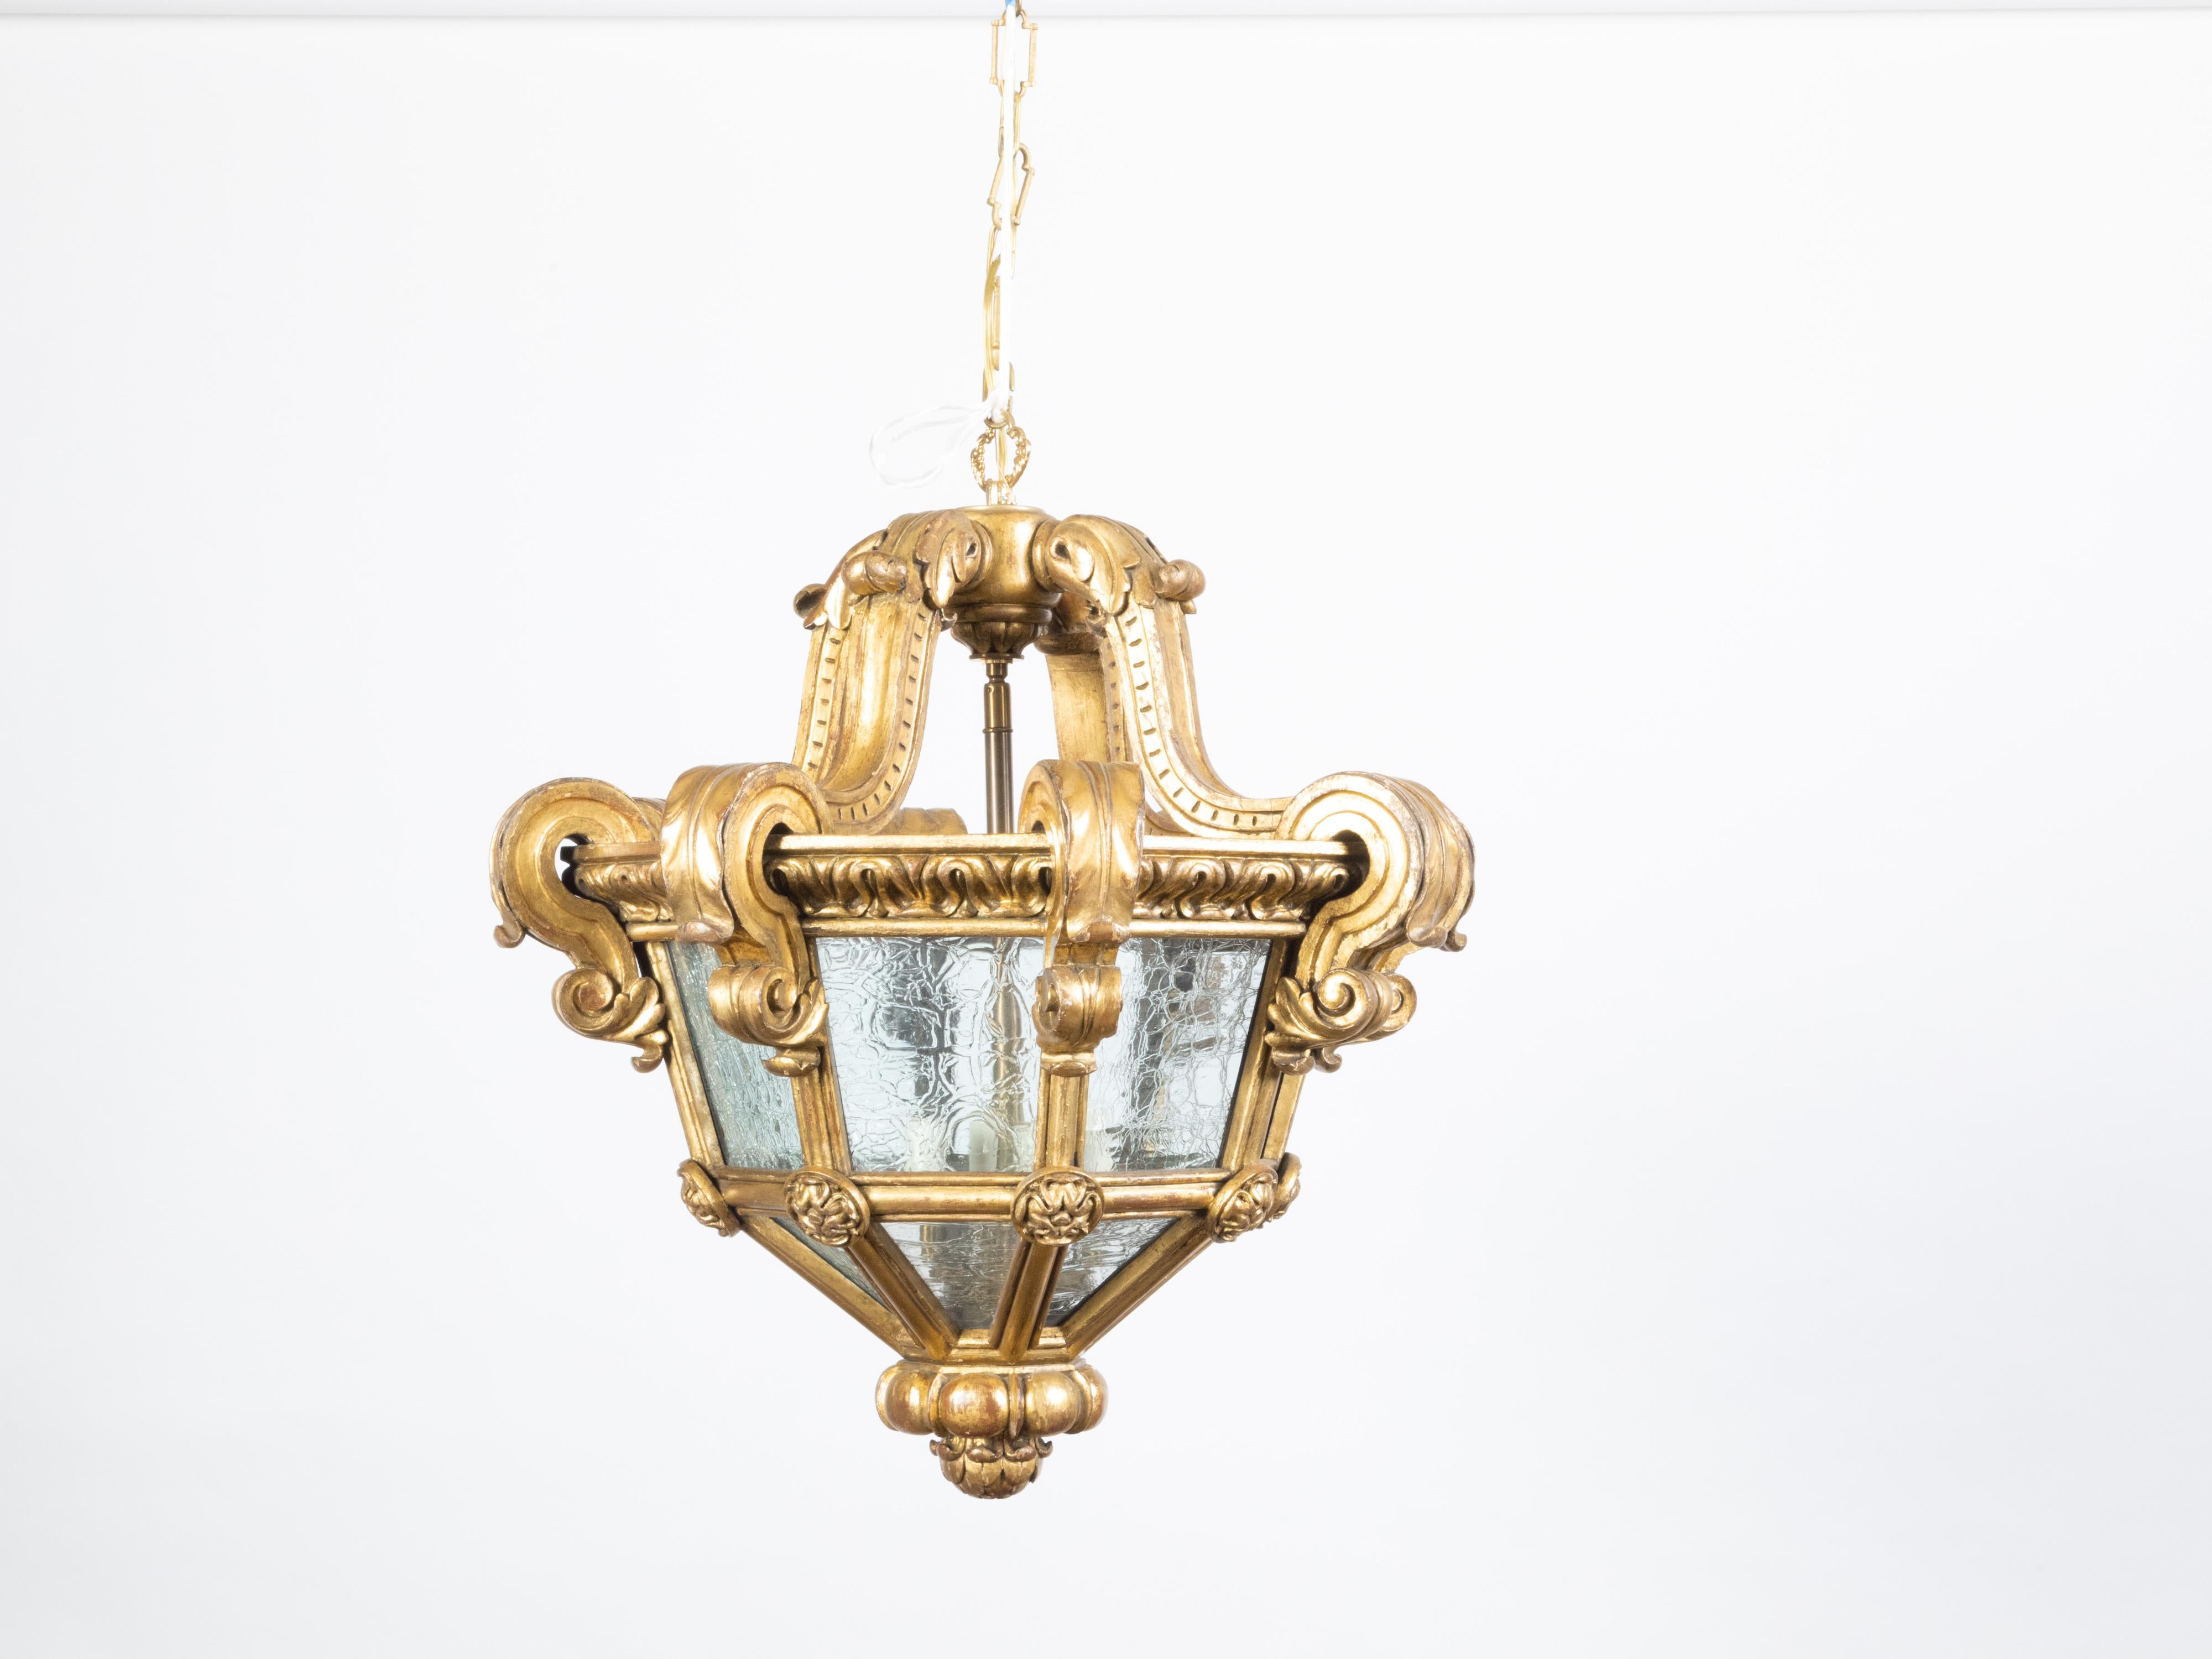 A French Baroque style giltwood lantern from the early 20th century, with volutes and textured glass. Created in France at the Turn of the Century, this lantern captures our attention with its golden tones and scrolling lines. Delicate volutes